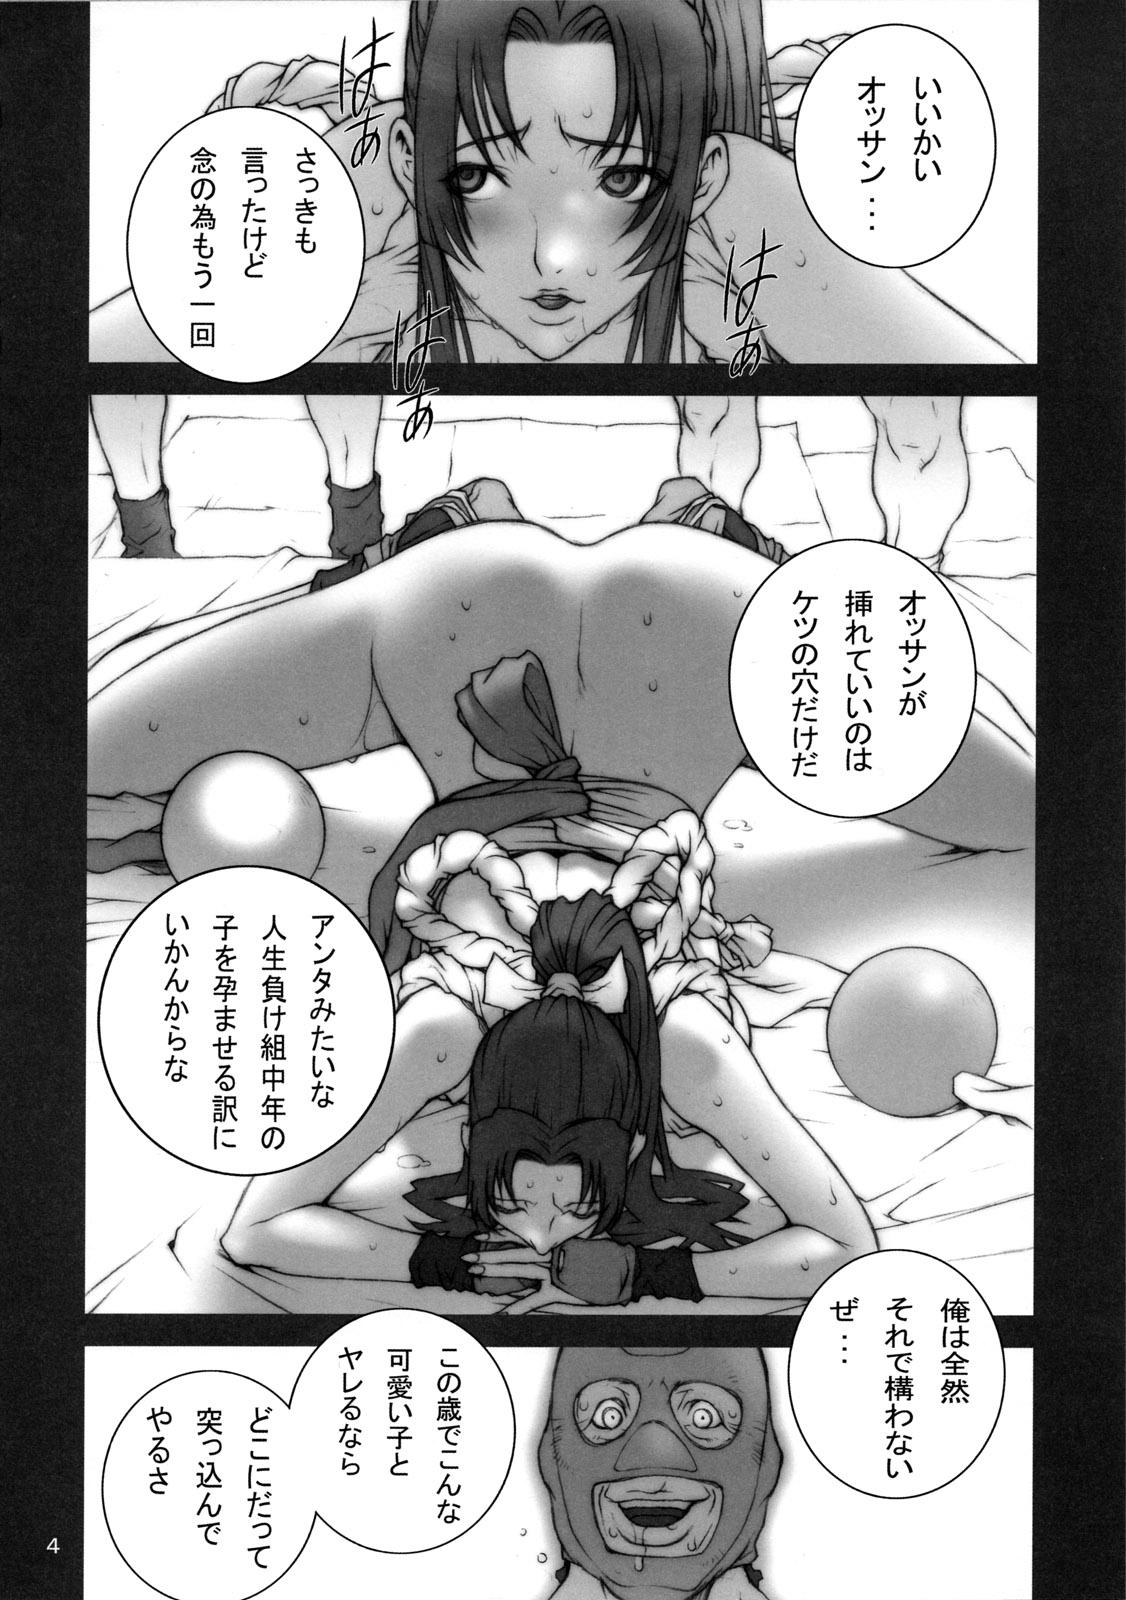 Free Blowjobs Tou San - King of fighters Teenage - Page 6